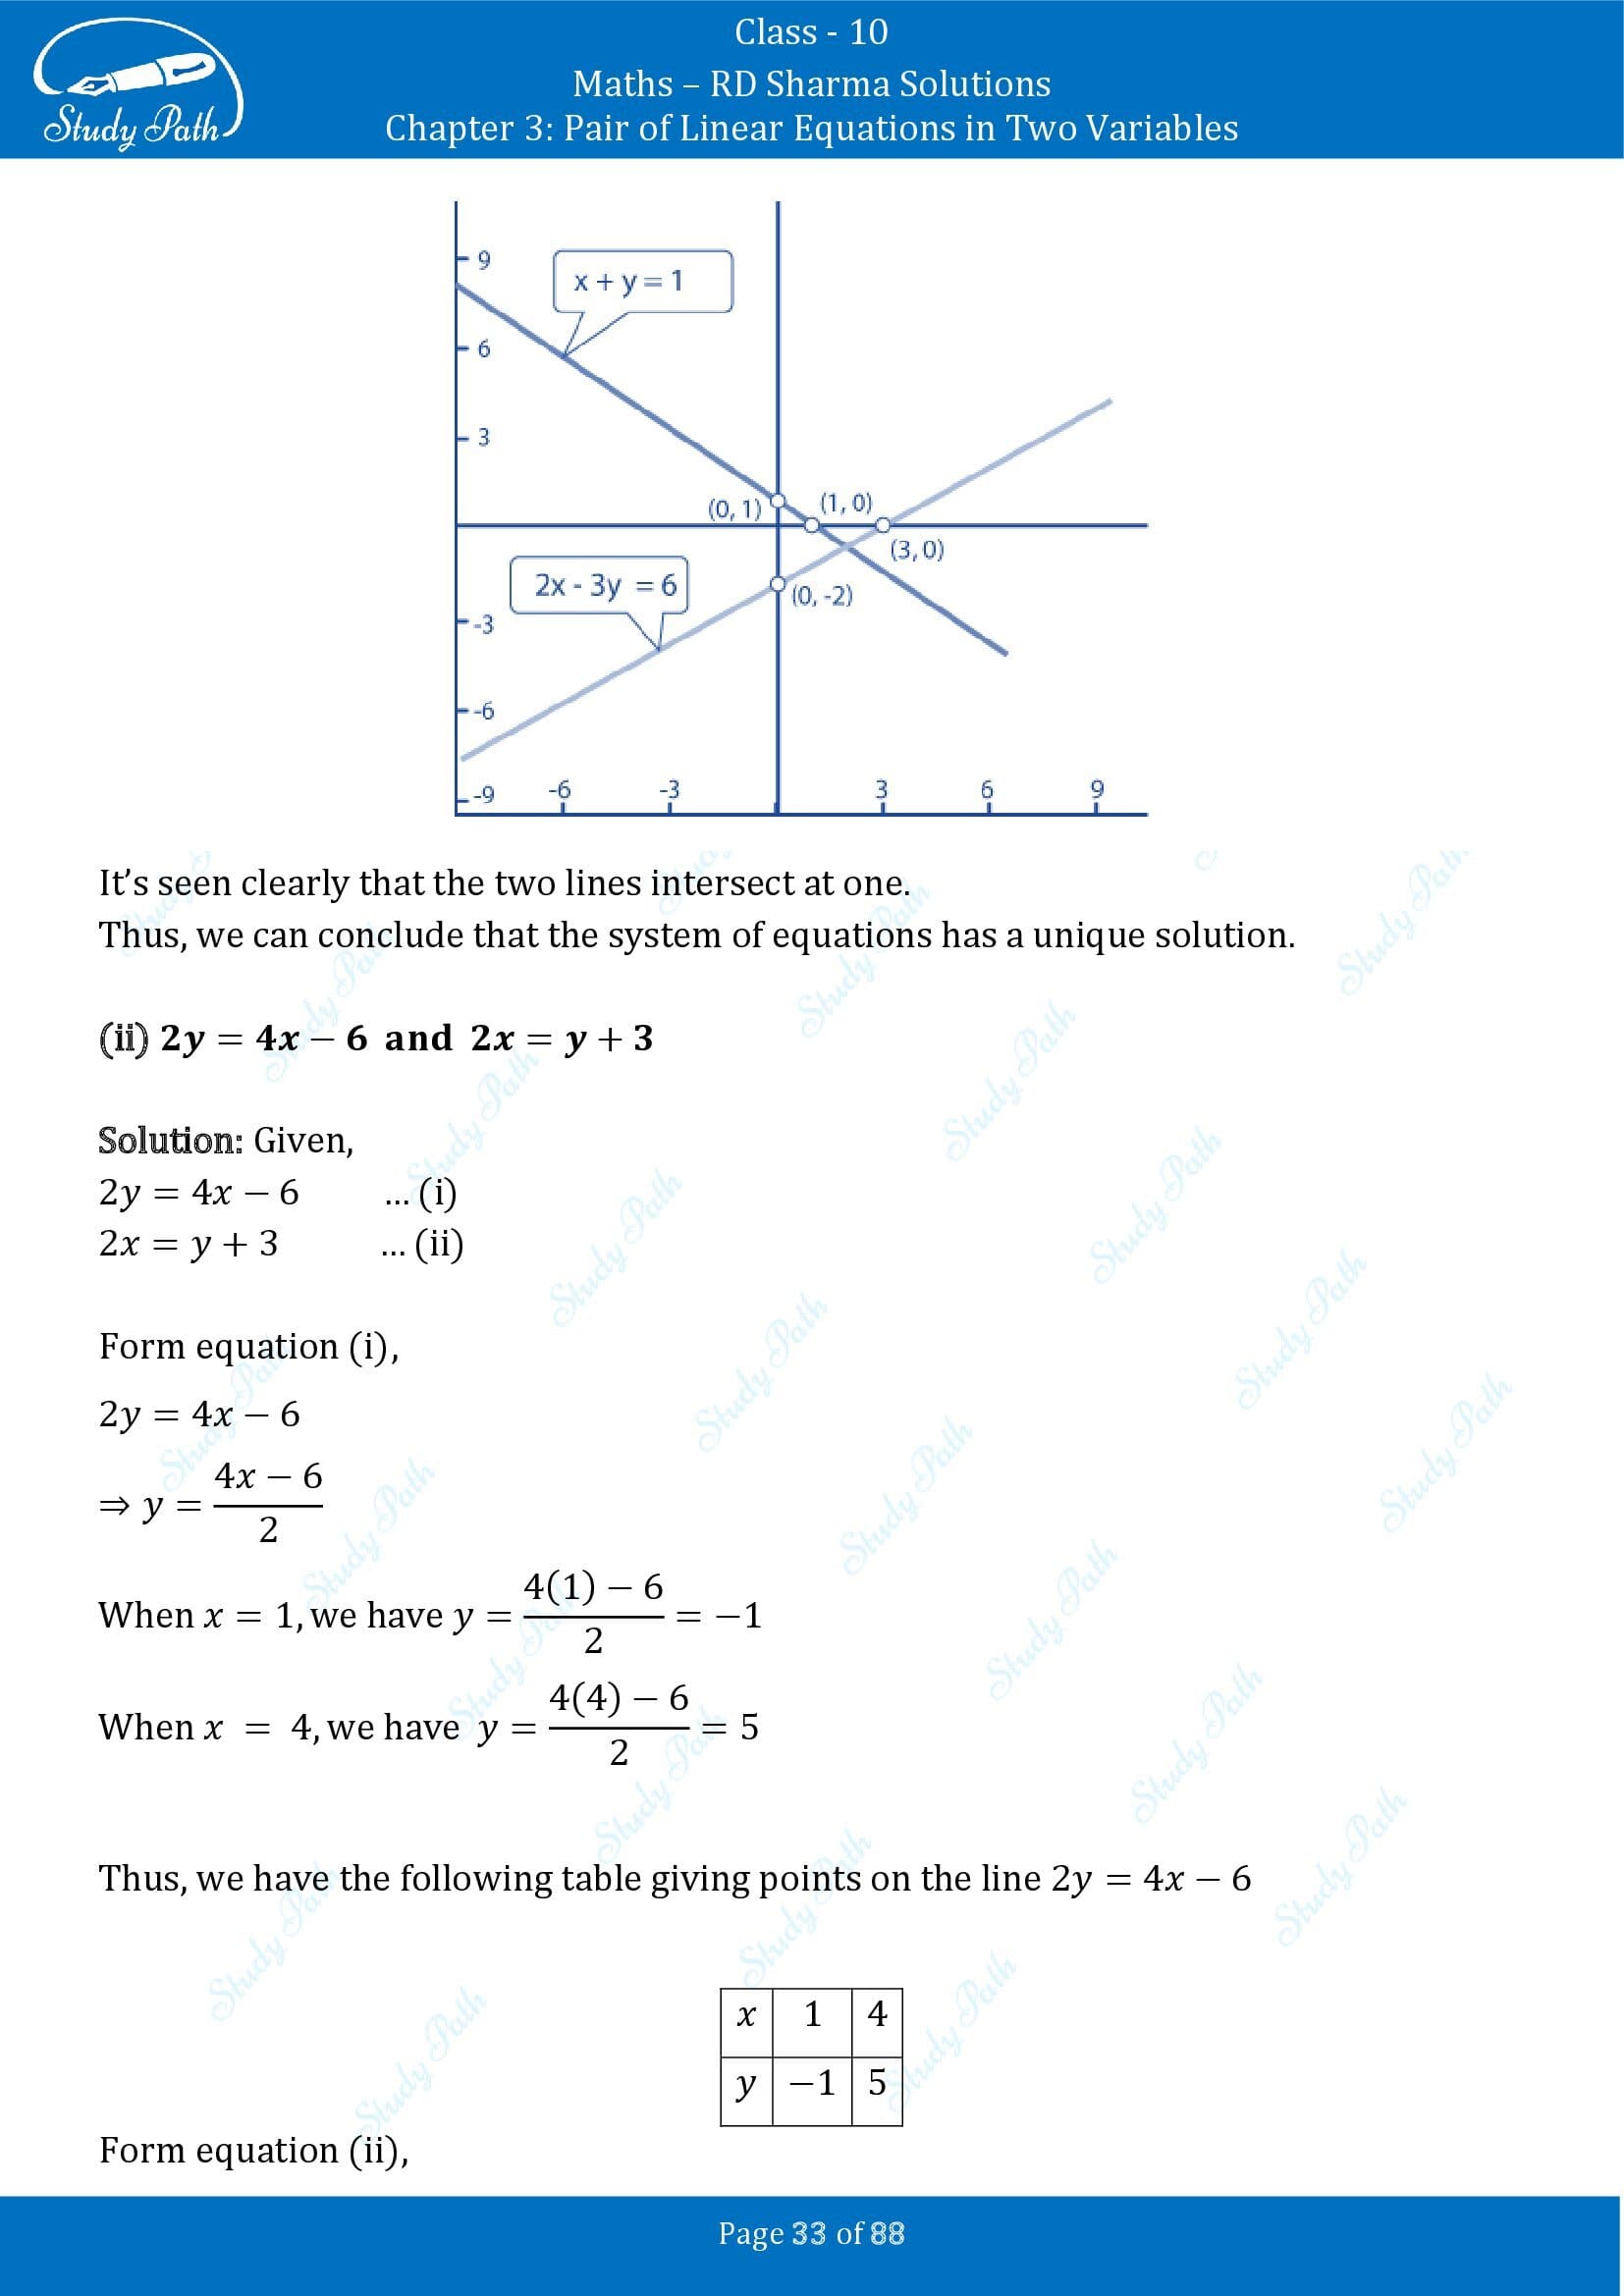 RD Sharma Solutions Class 10 Chapter 3 Pair of Linear Equations in Two Variables Exercise 3.2 00033